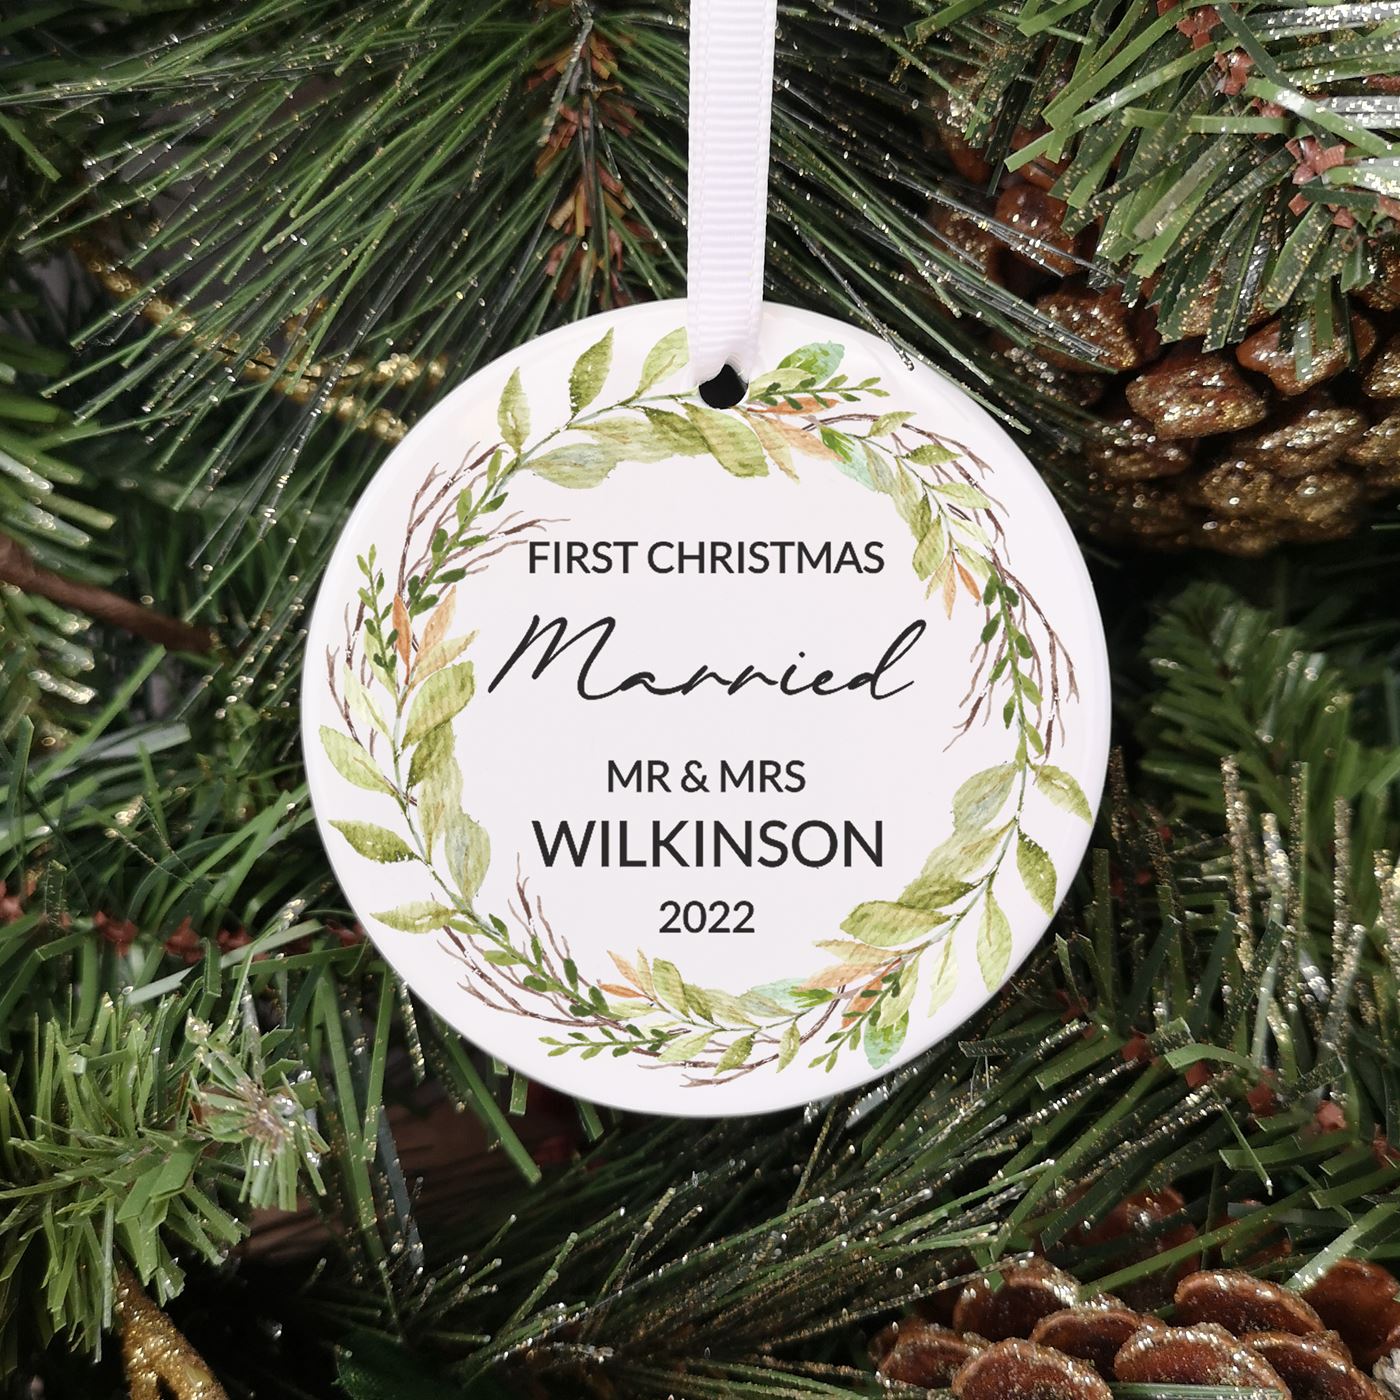 Personalised Ceramic First Christmas Married Bauble - Foliage Wreath